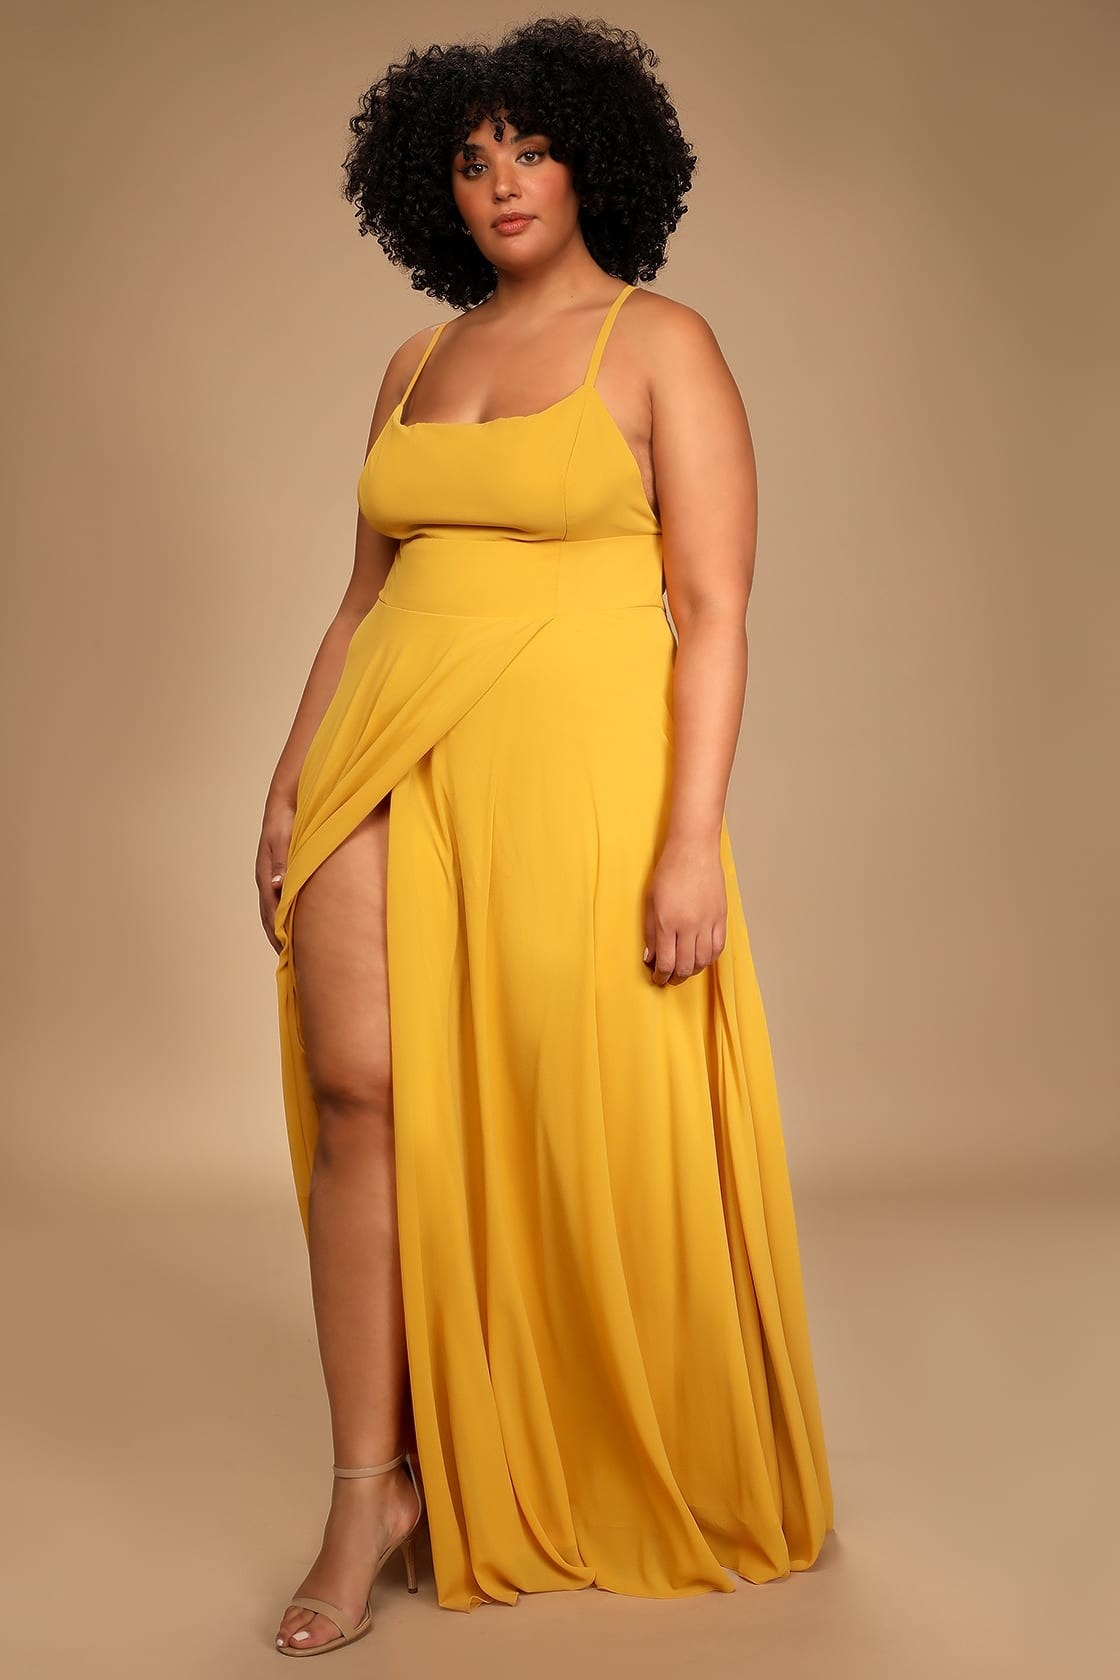 model in mustard yellow maxi dress with high leg slit and spaghetti straps